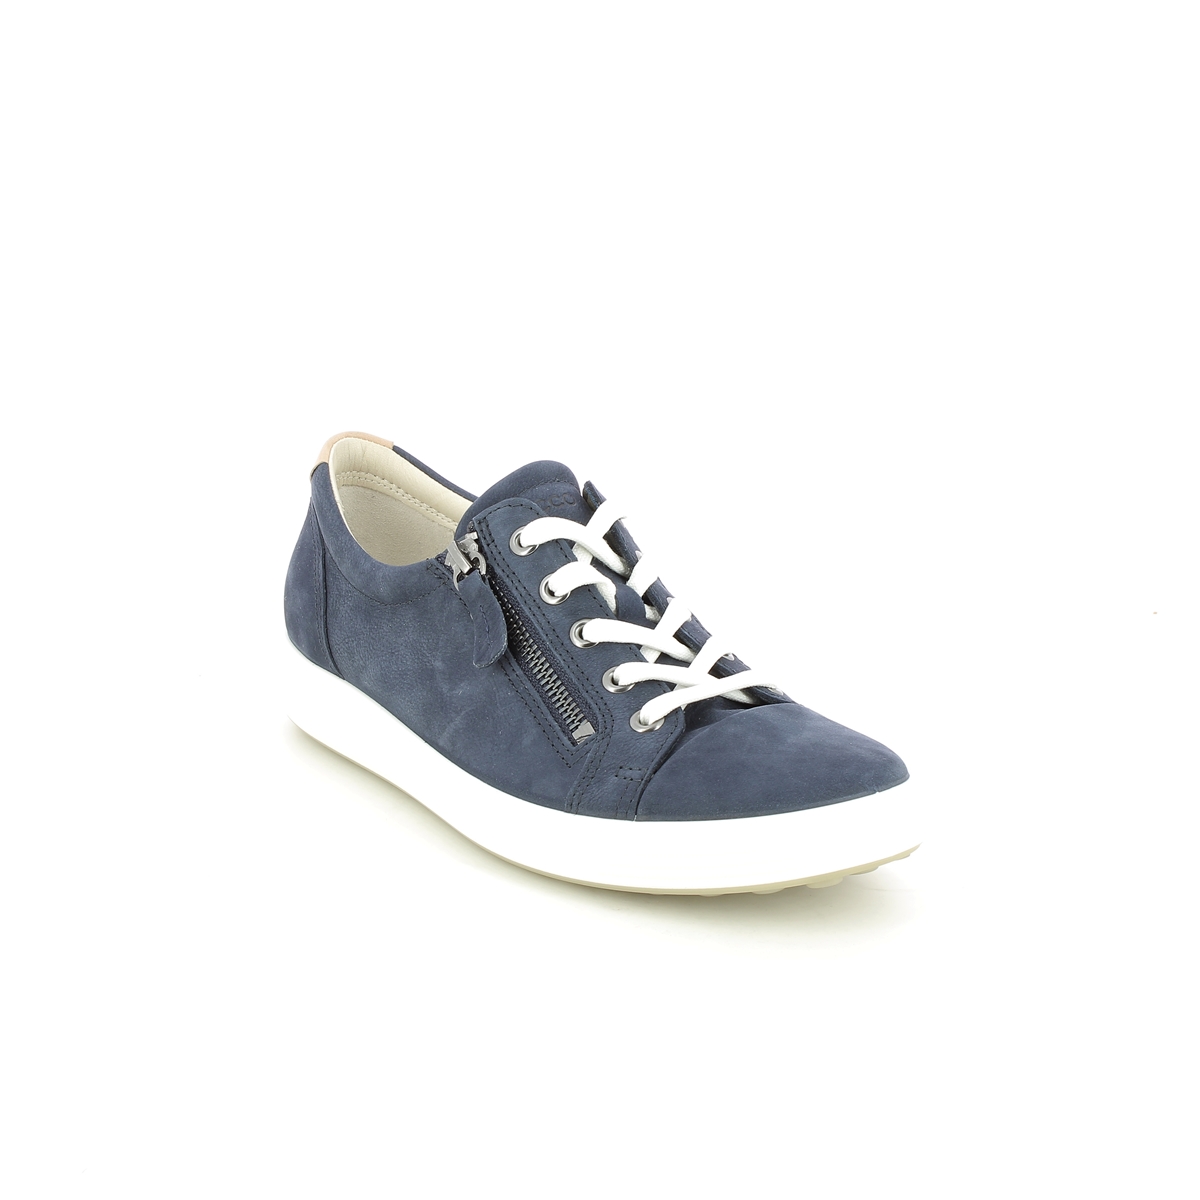 ECCO Soft 7 Lace Zip Navy Nubuck Womens trainers 430853-02303 in a Plain Nubuck Leather in Size 40